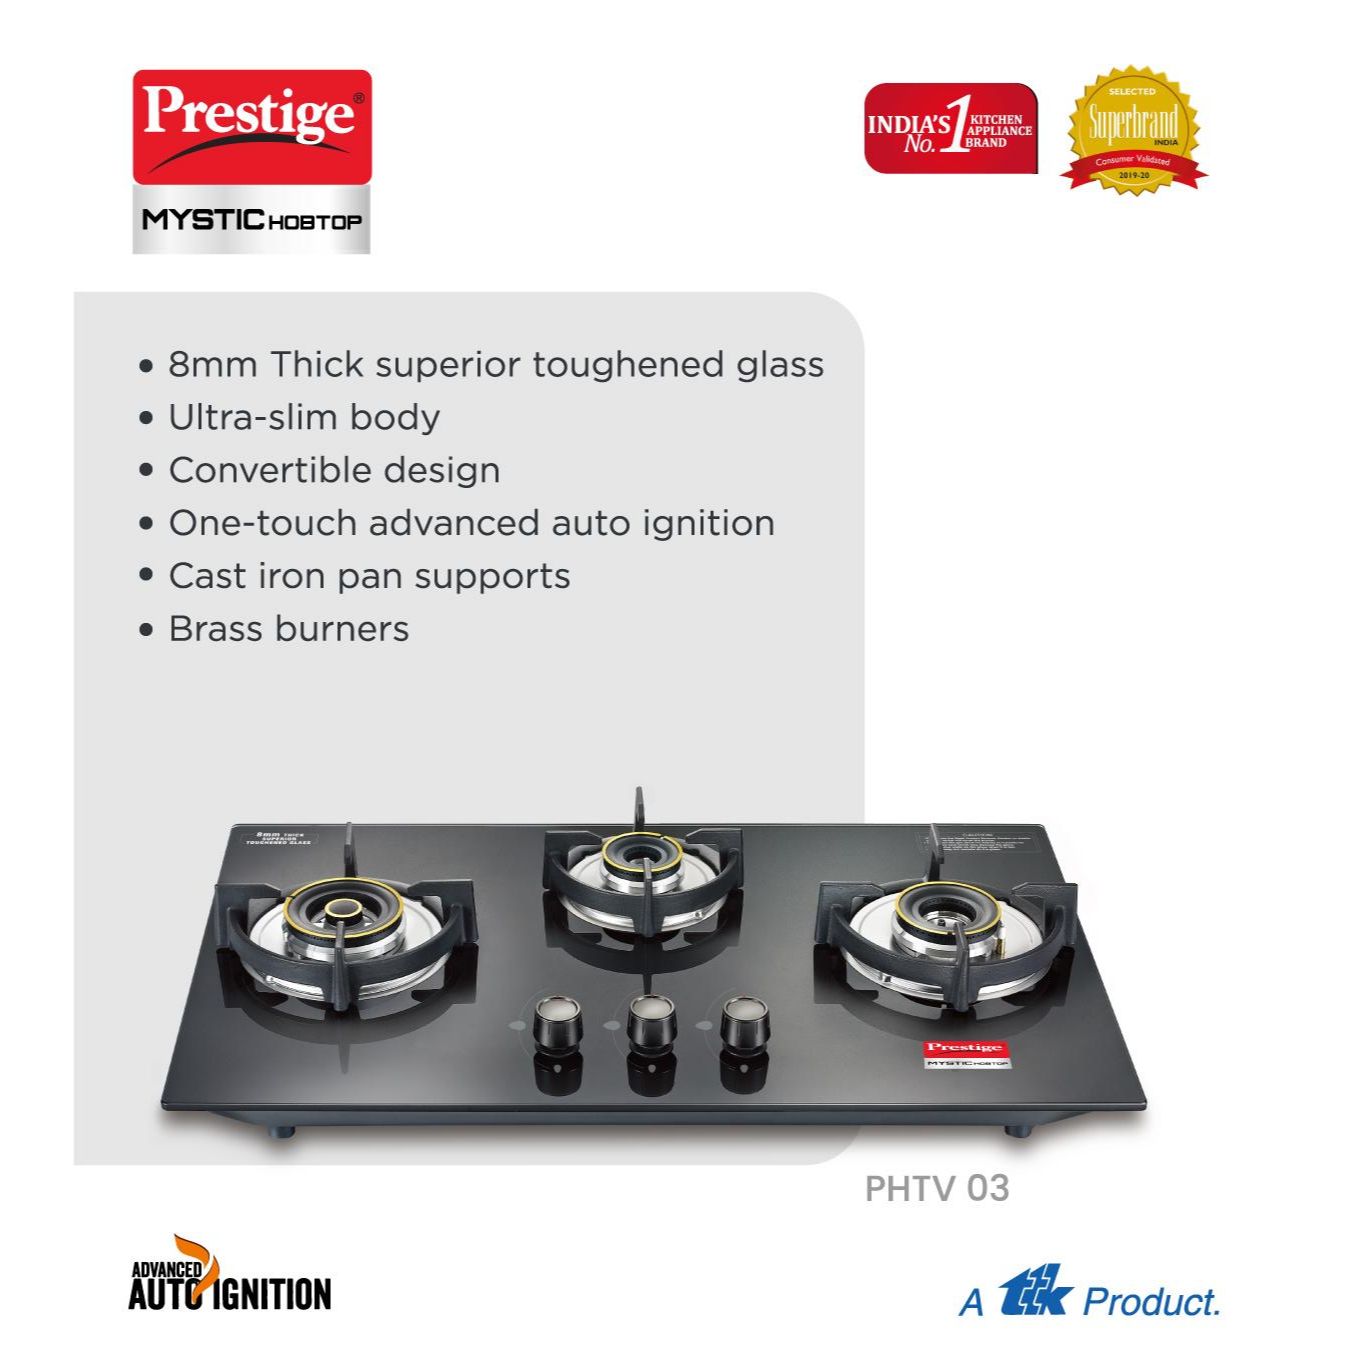 Prestige Mystic Hobtop PHTM 03 AI Glass Top Hob Gas Stove with One-Touch Advanced Auto-Ignition, 3 Burner